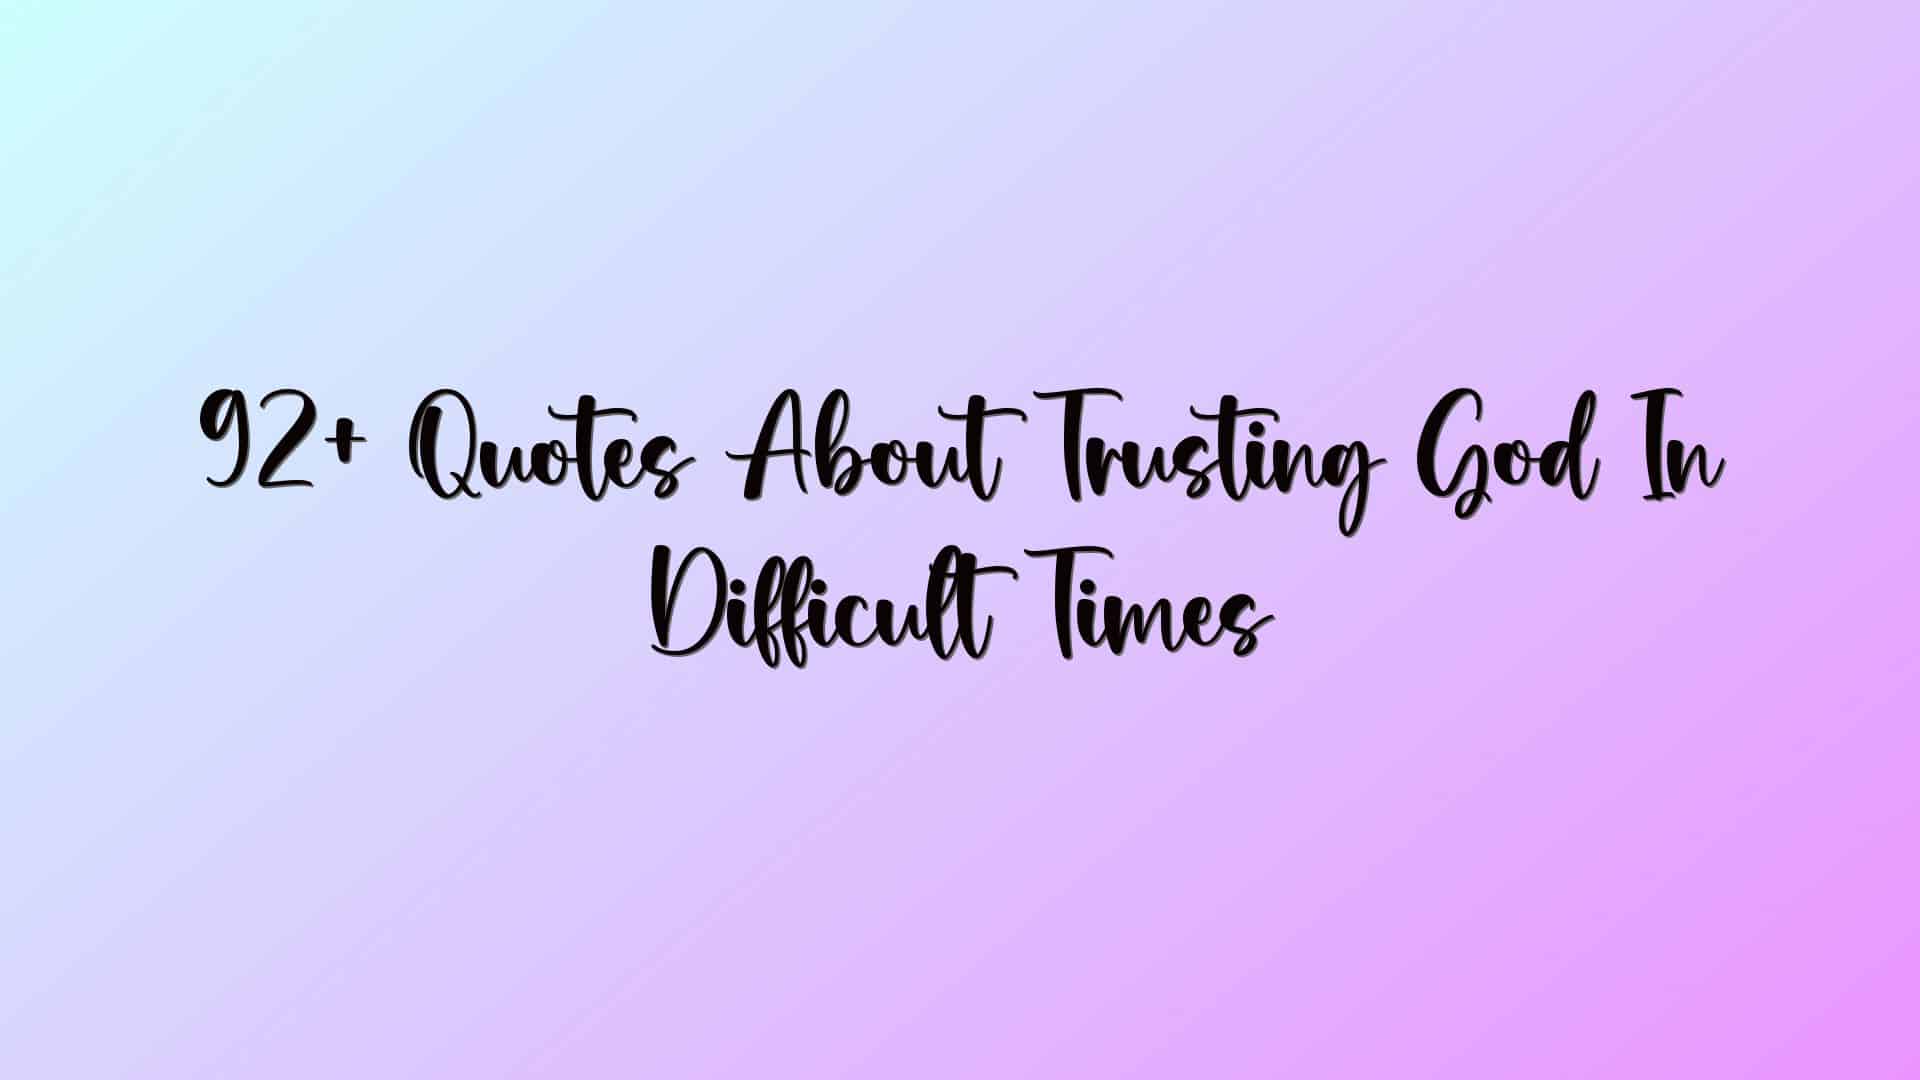 92+ Quotes About Trusting God In Difficult Times